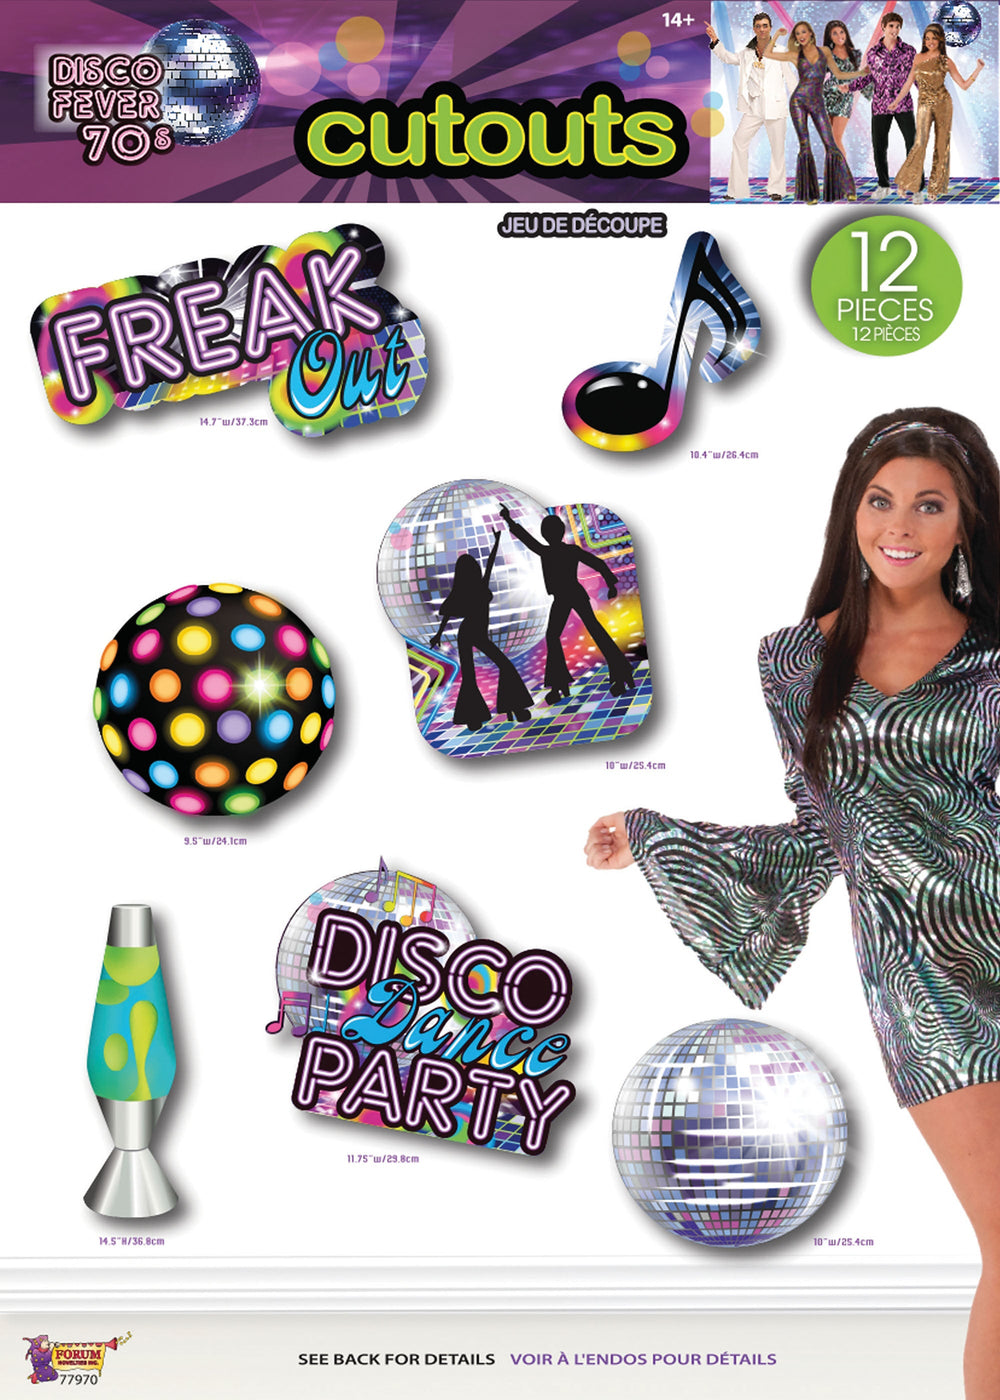 Disco party cut outs